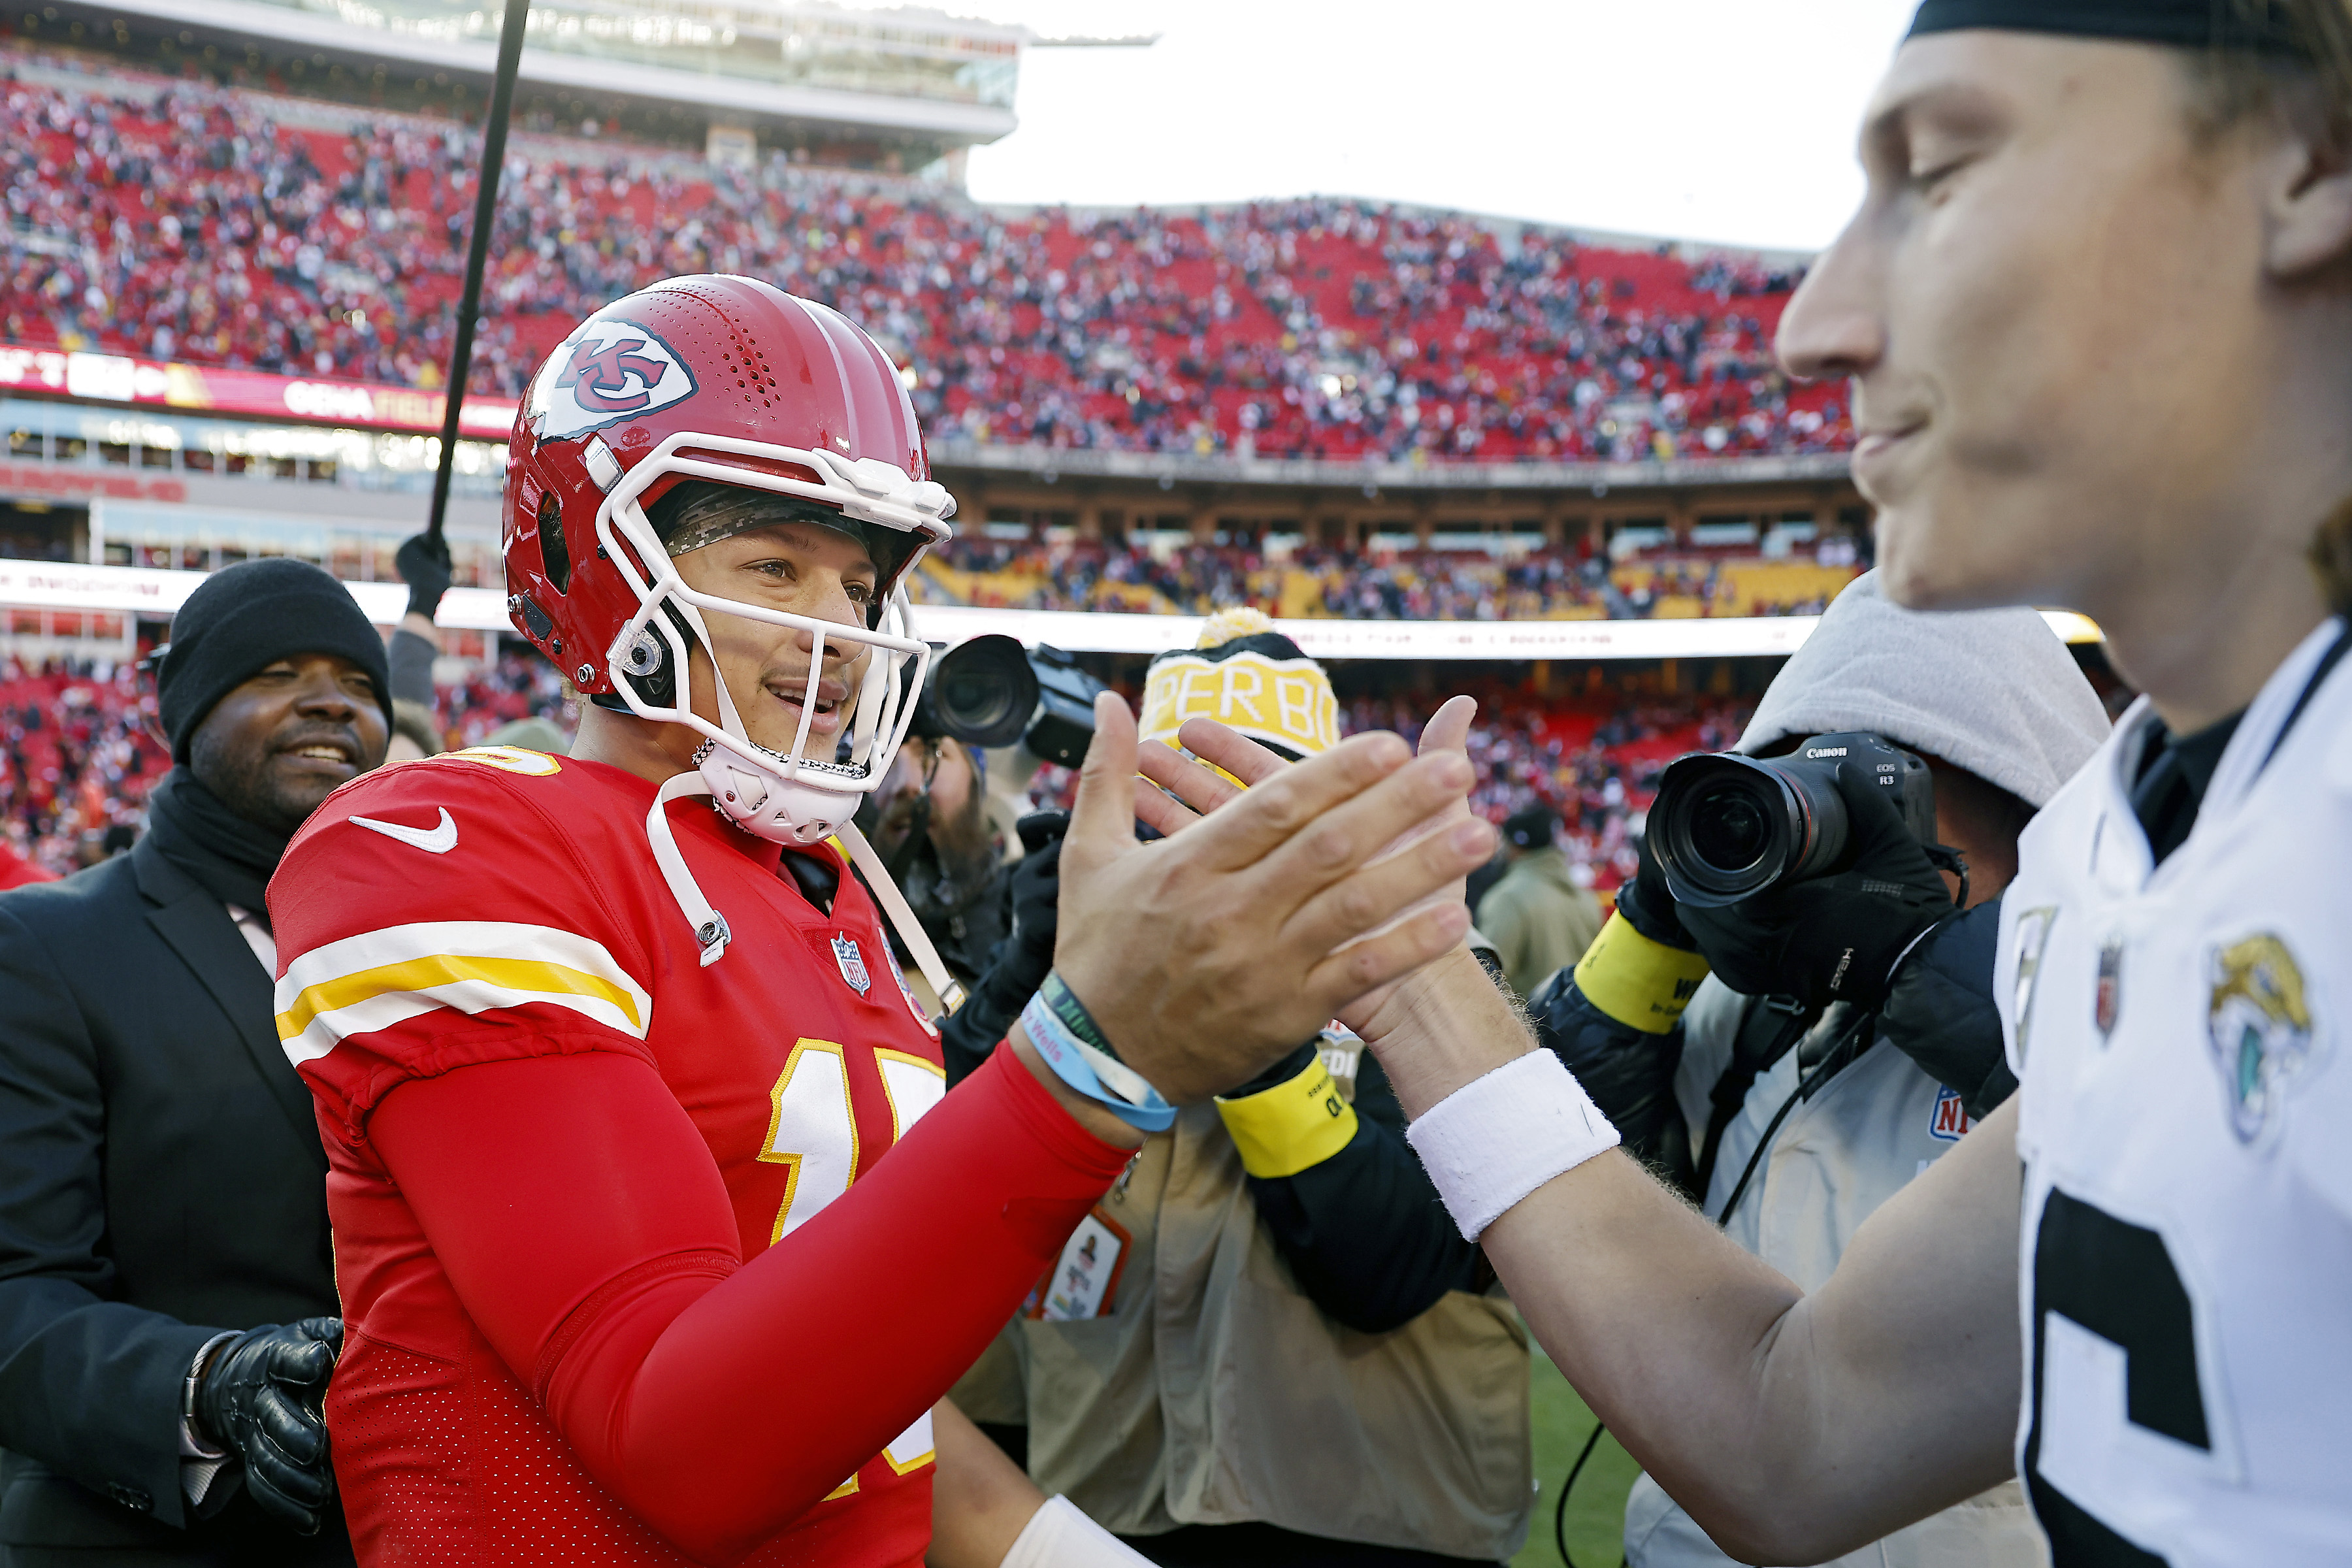 Patrick Mahomes #15 of the Kansas City Chiefs shakes hands with Trevor Lawrence #16 of the Jacksonville Jaguars after the Chiefs defeated the Jaguars 27-17 at Arrowhead Stadium on November 13, 2022 in Kansas City, Missouri.